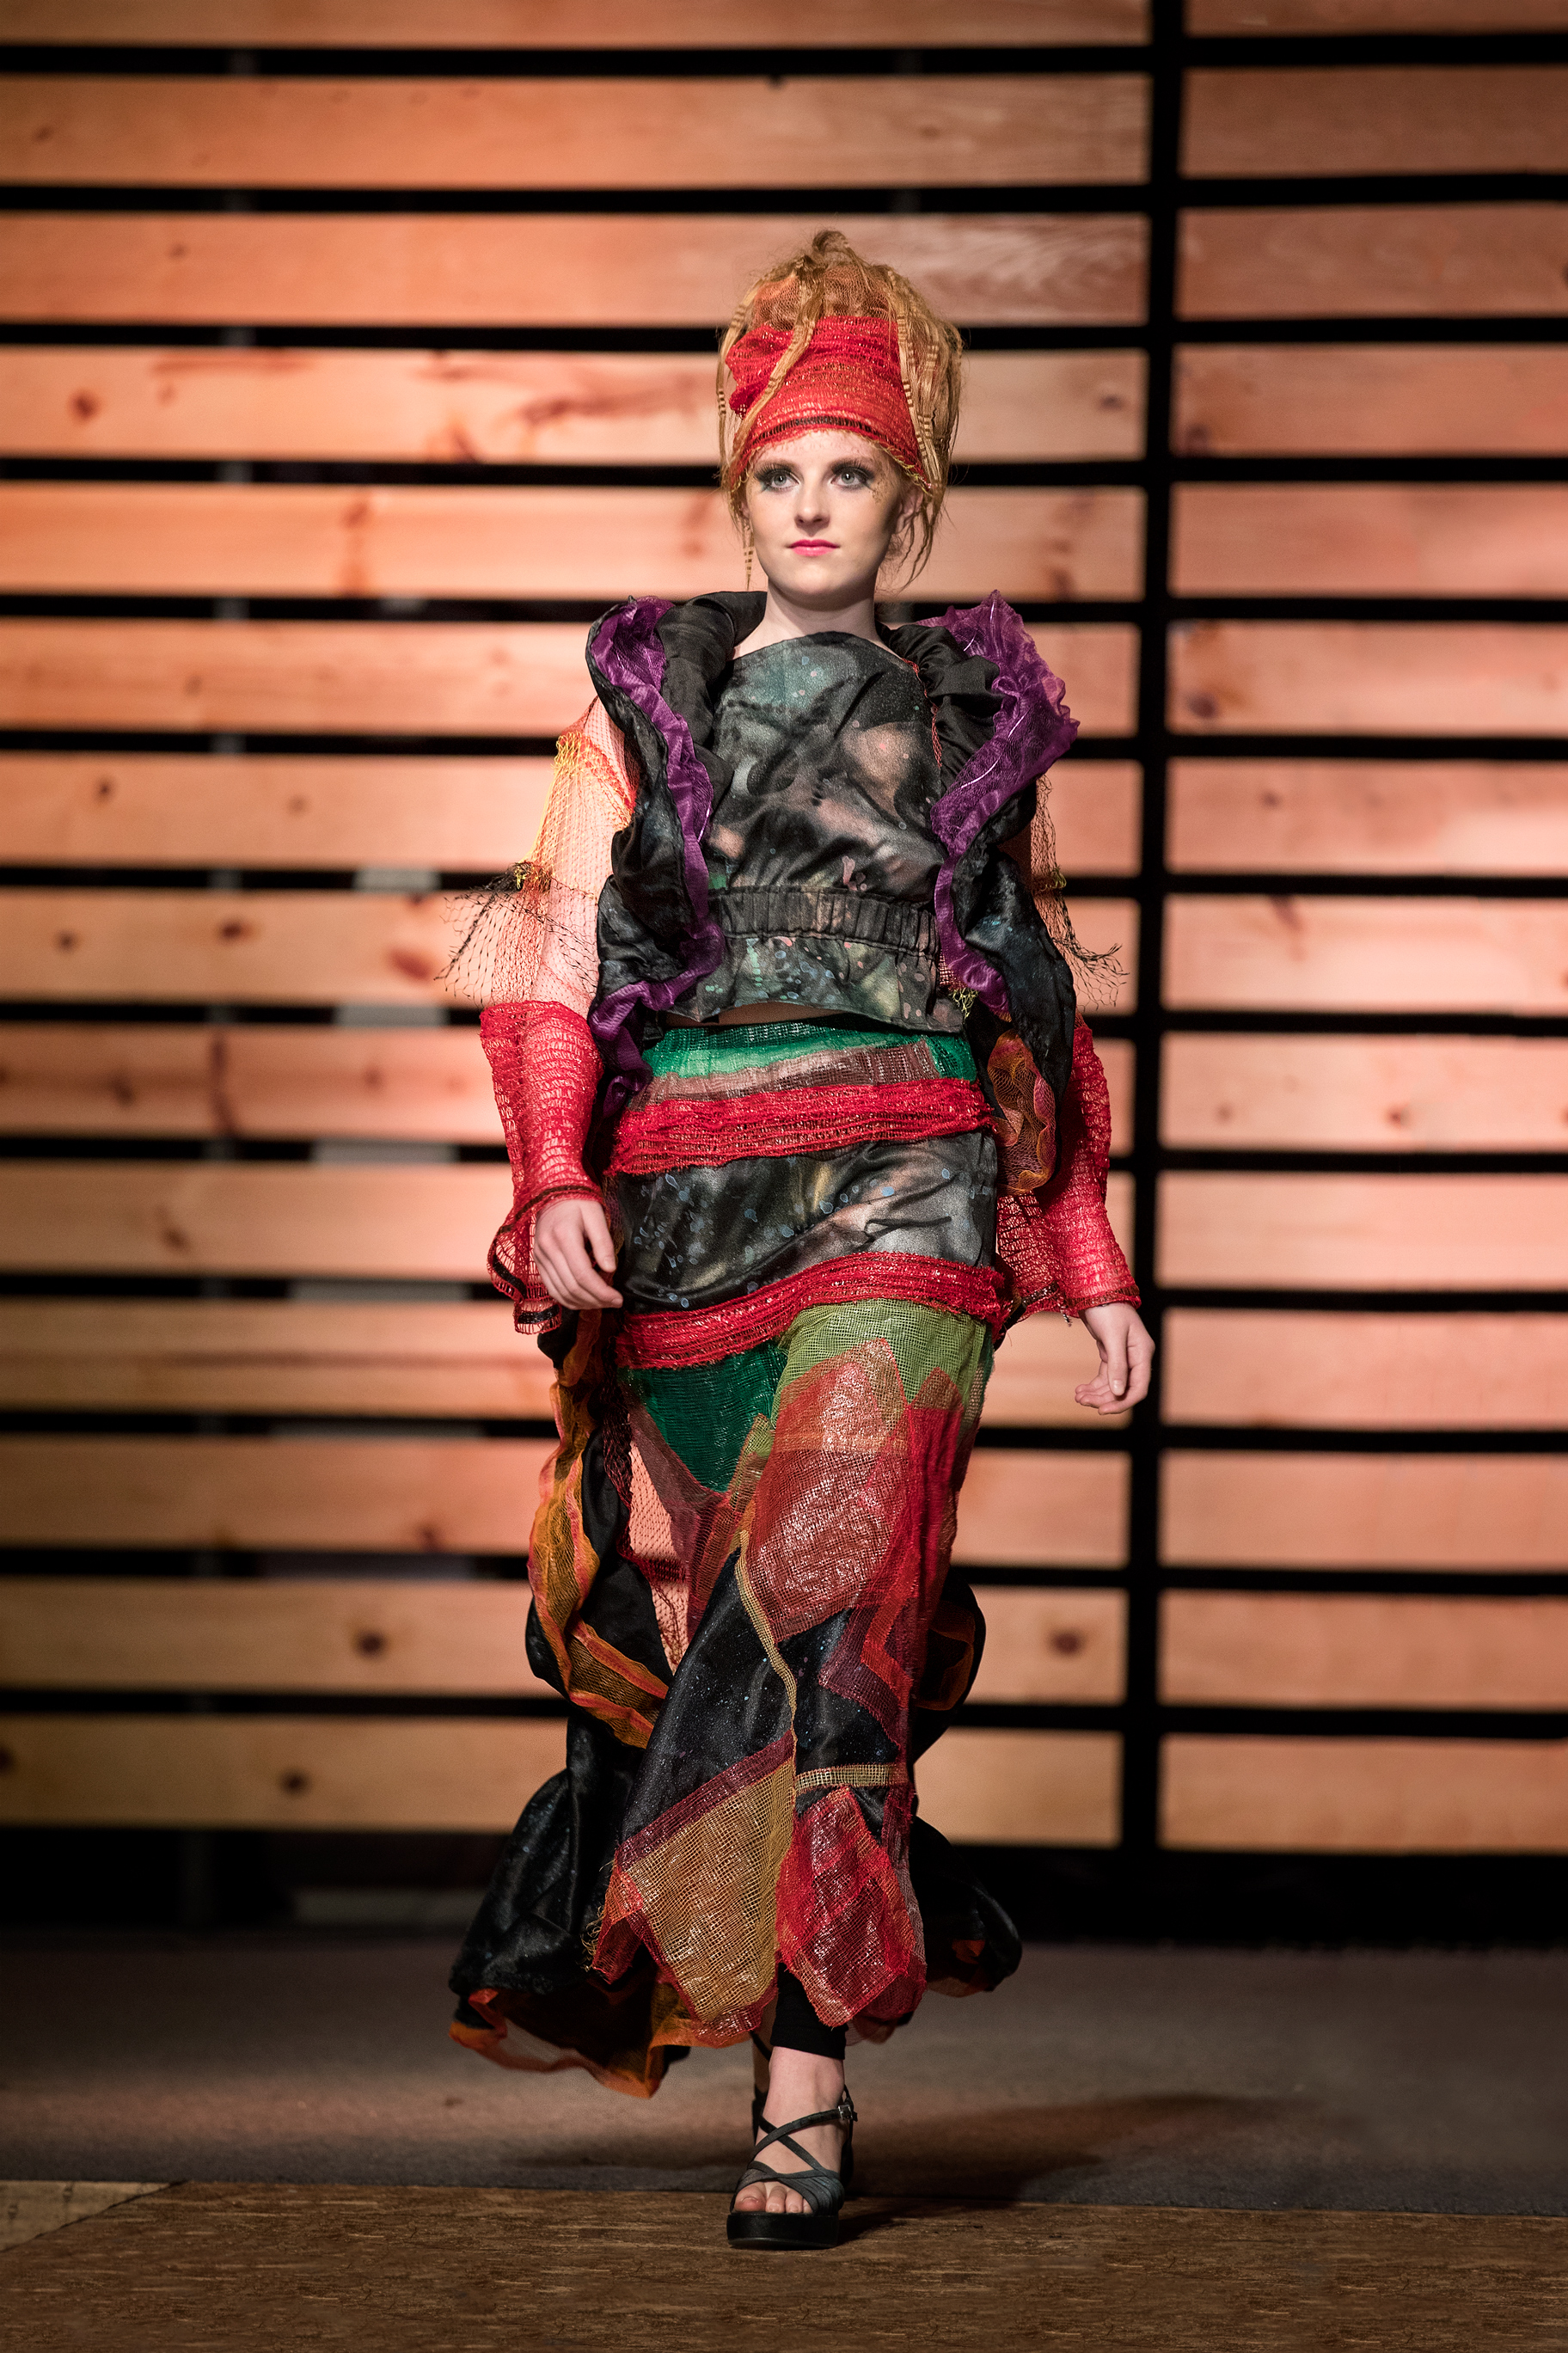 Mission Wear Upcycled Patchwork Fashion Show - 043.jpg